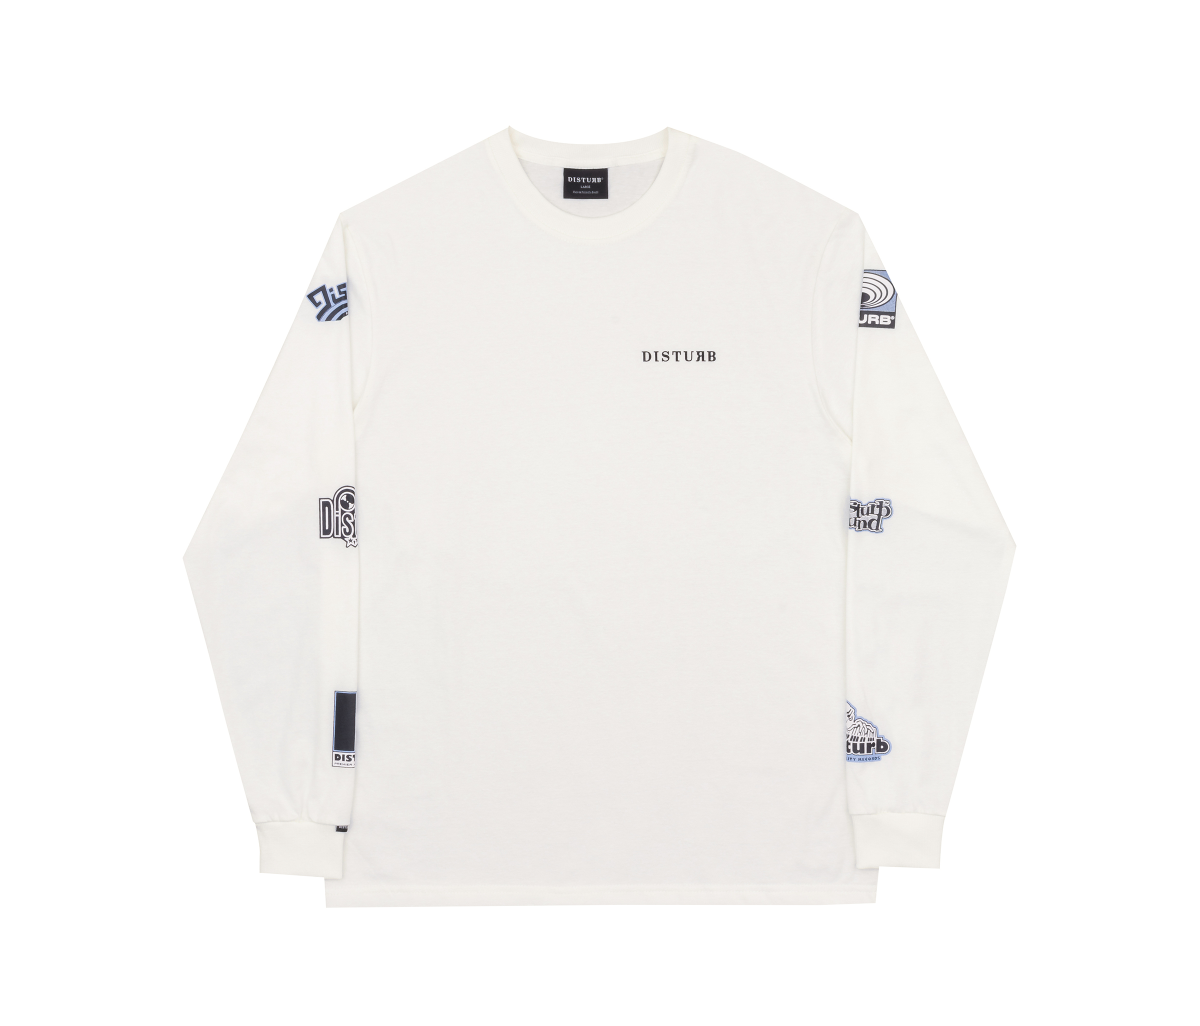 DISTURB - Longsleeve Record Labels White - Slow Office